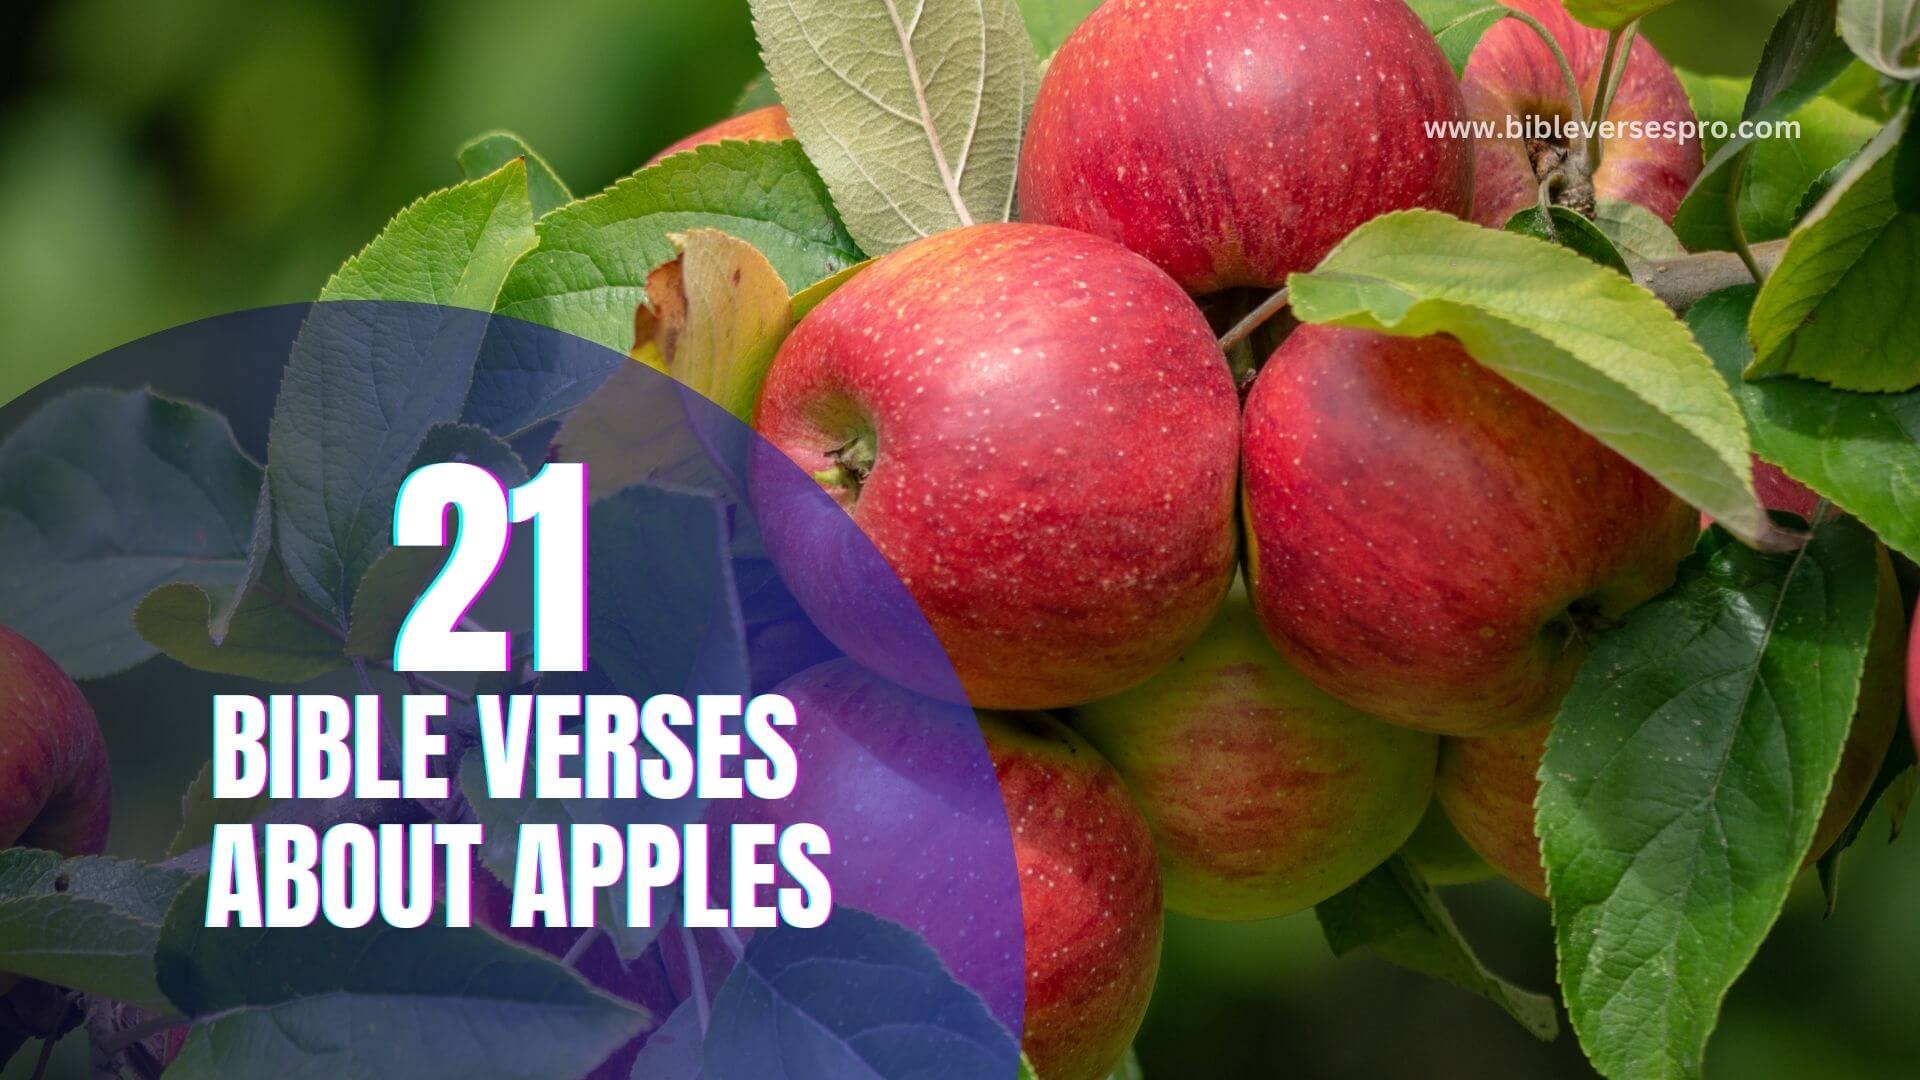 BIBLE VERSES ABOUT APPLES (1)